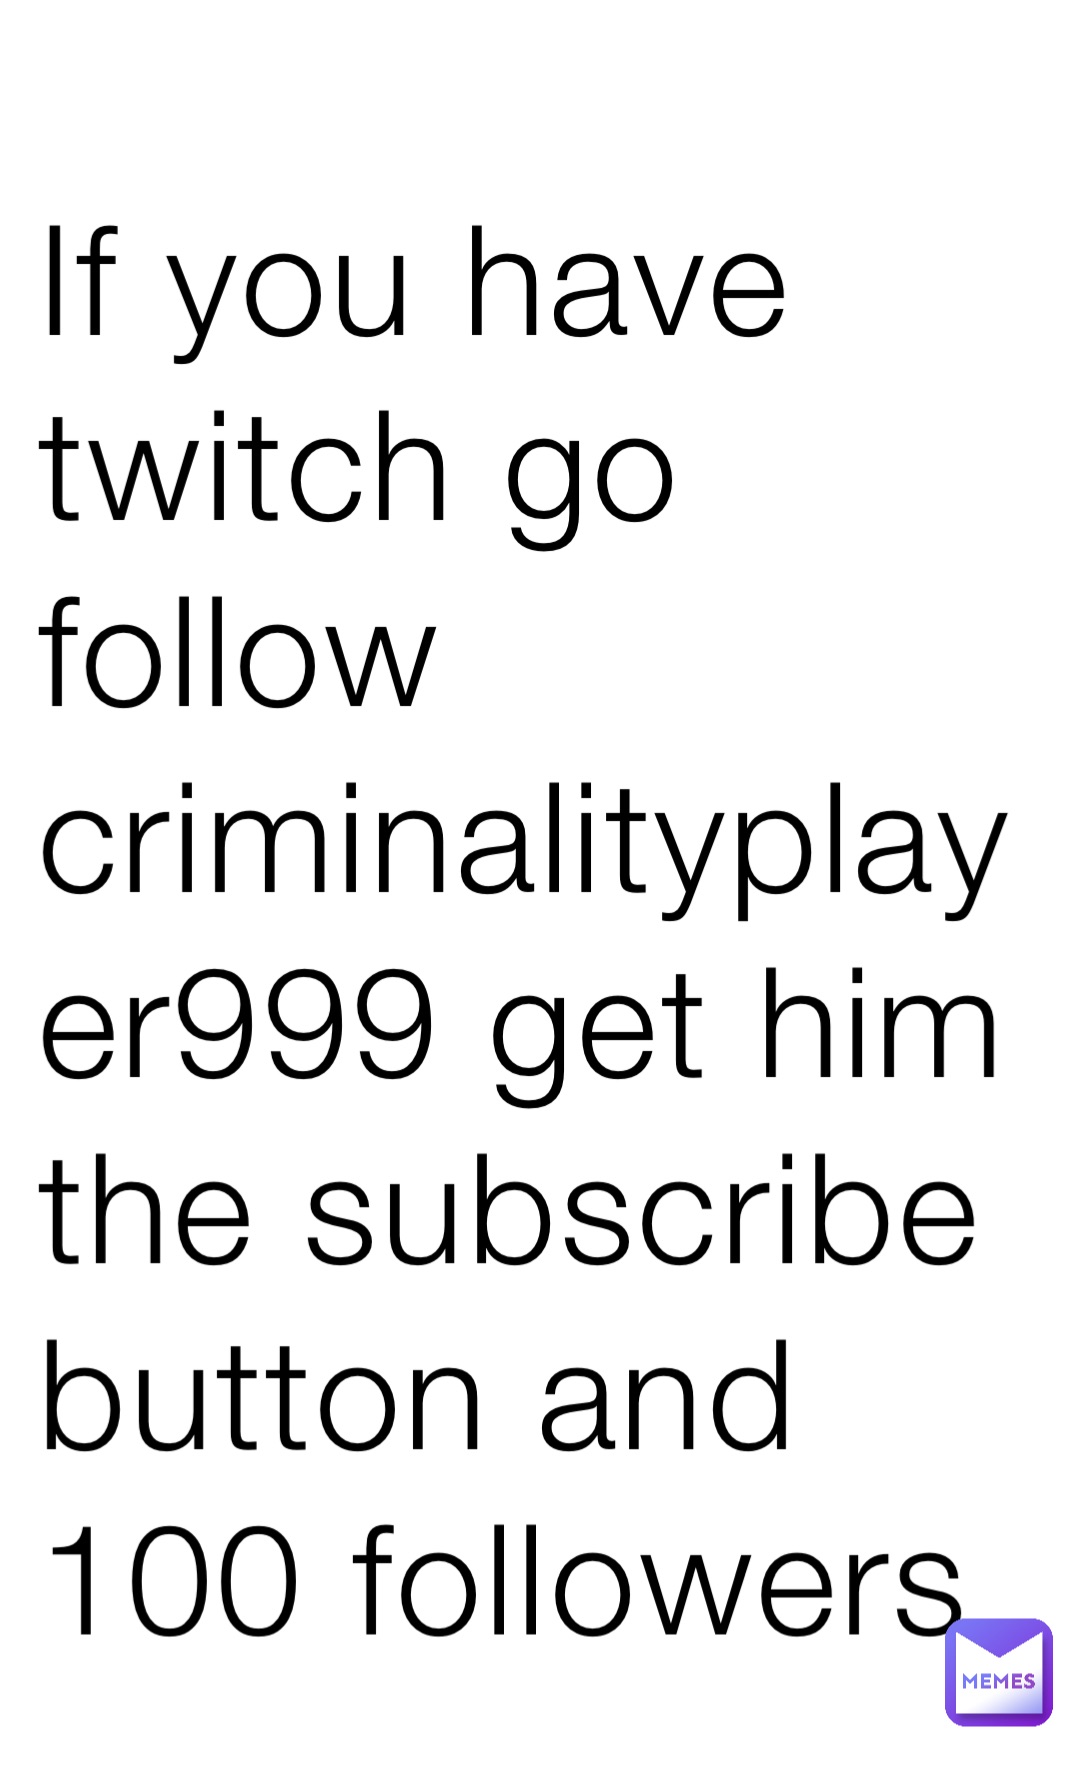 If you have twitch go follow criminalityplayer999 get him the subscribe button and 100 followers